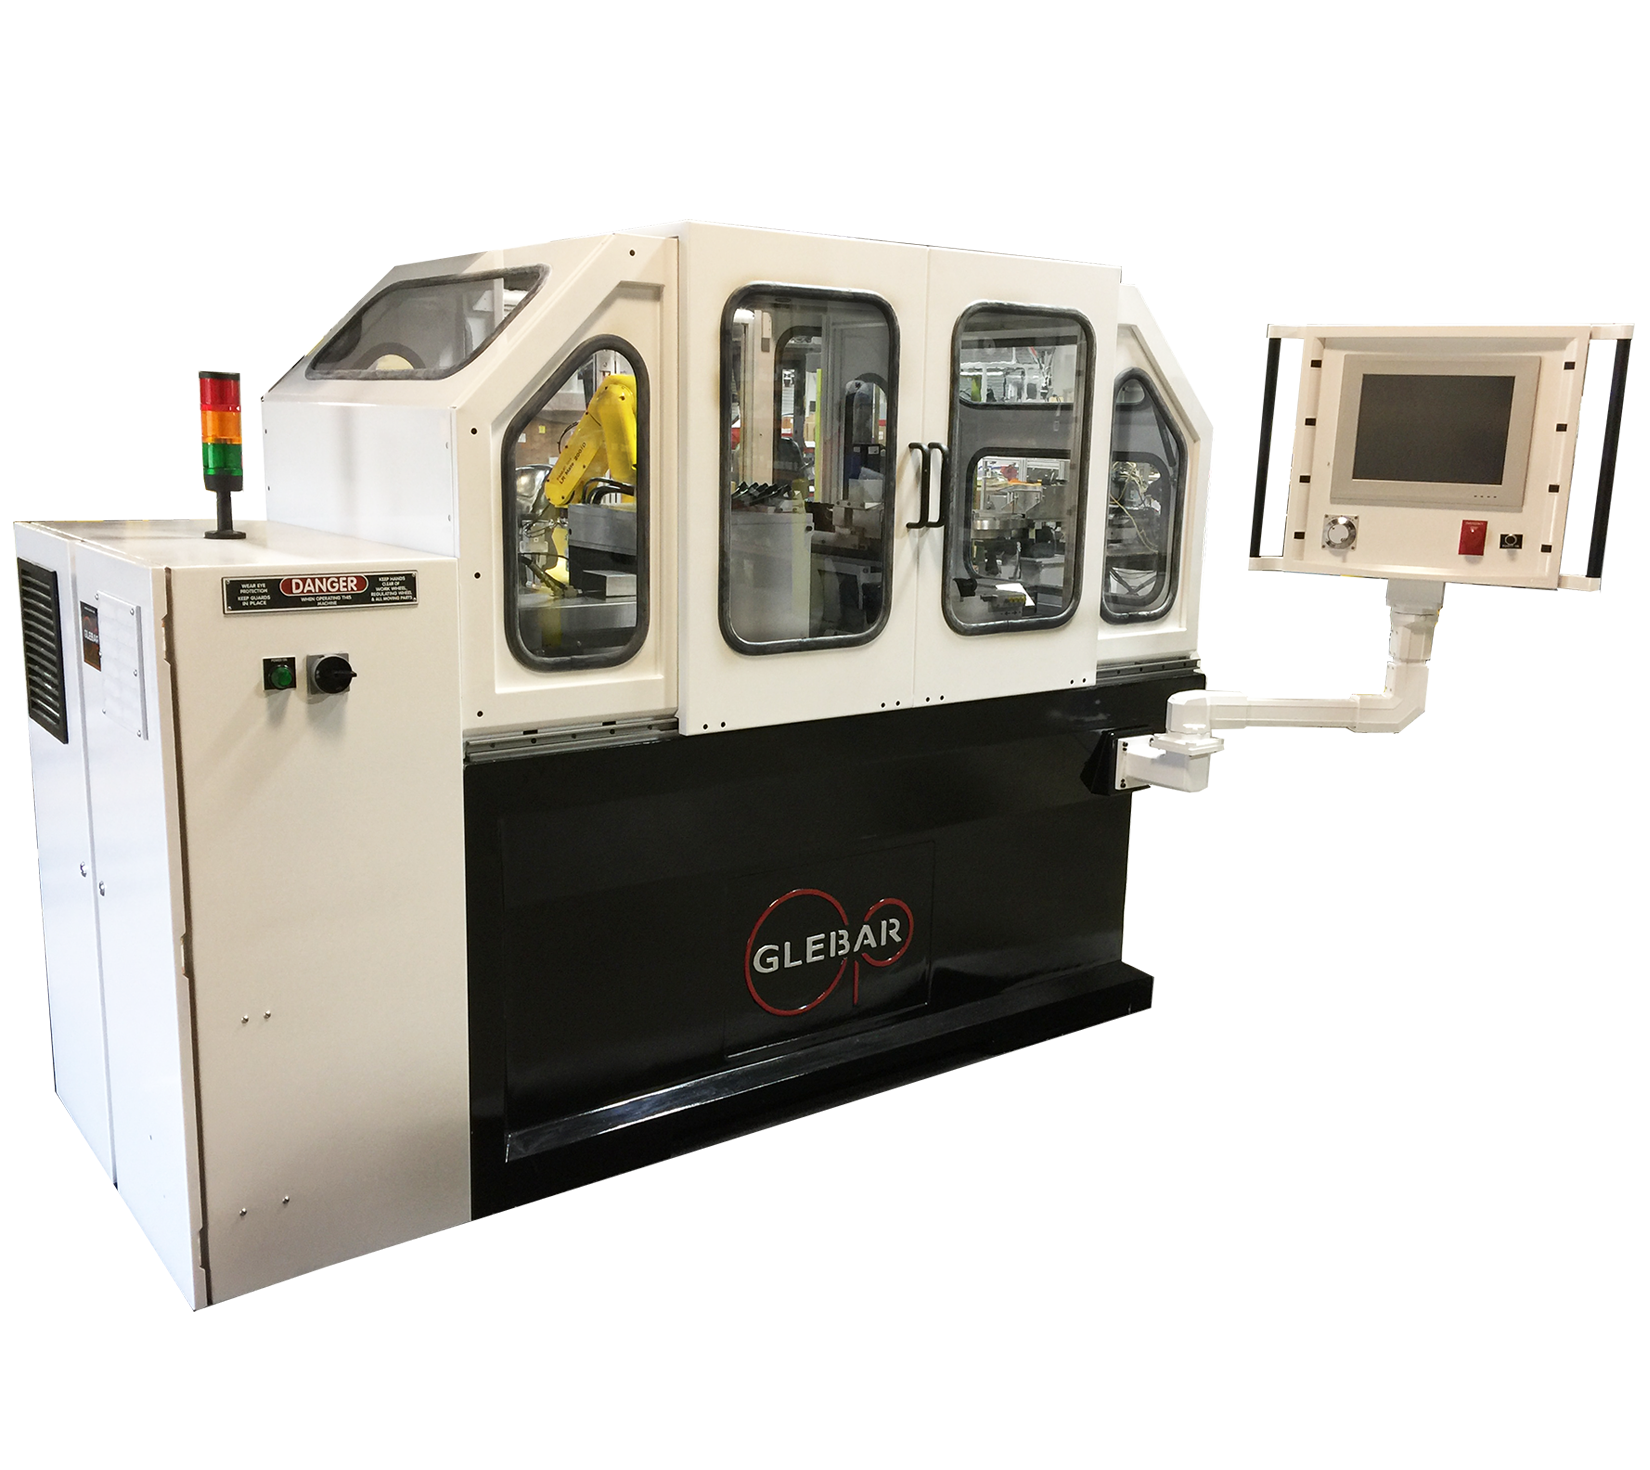 , Automated CNC Centerless Grinder Provides Continuous Operation, Increases Thruput For Grinding Asthma Inhaler Pins | GT-610 CNC